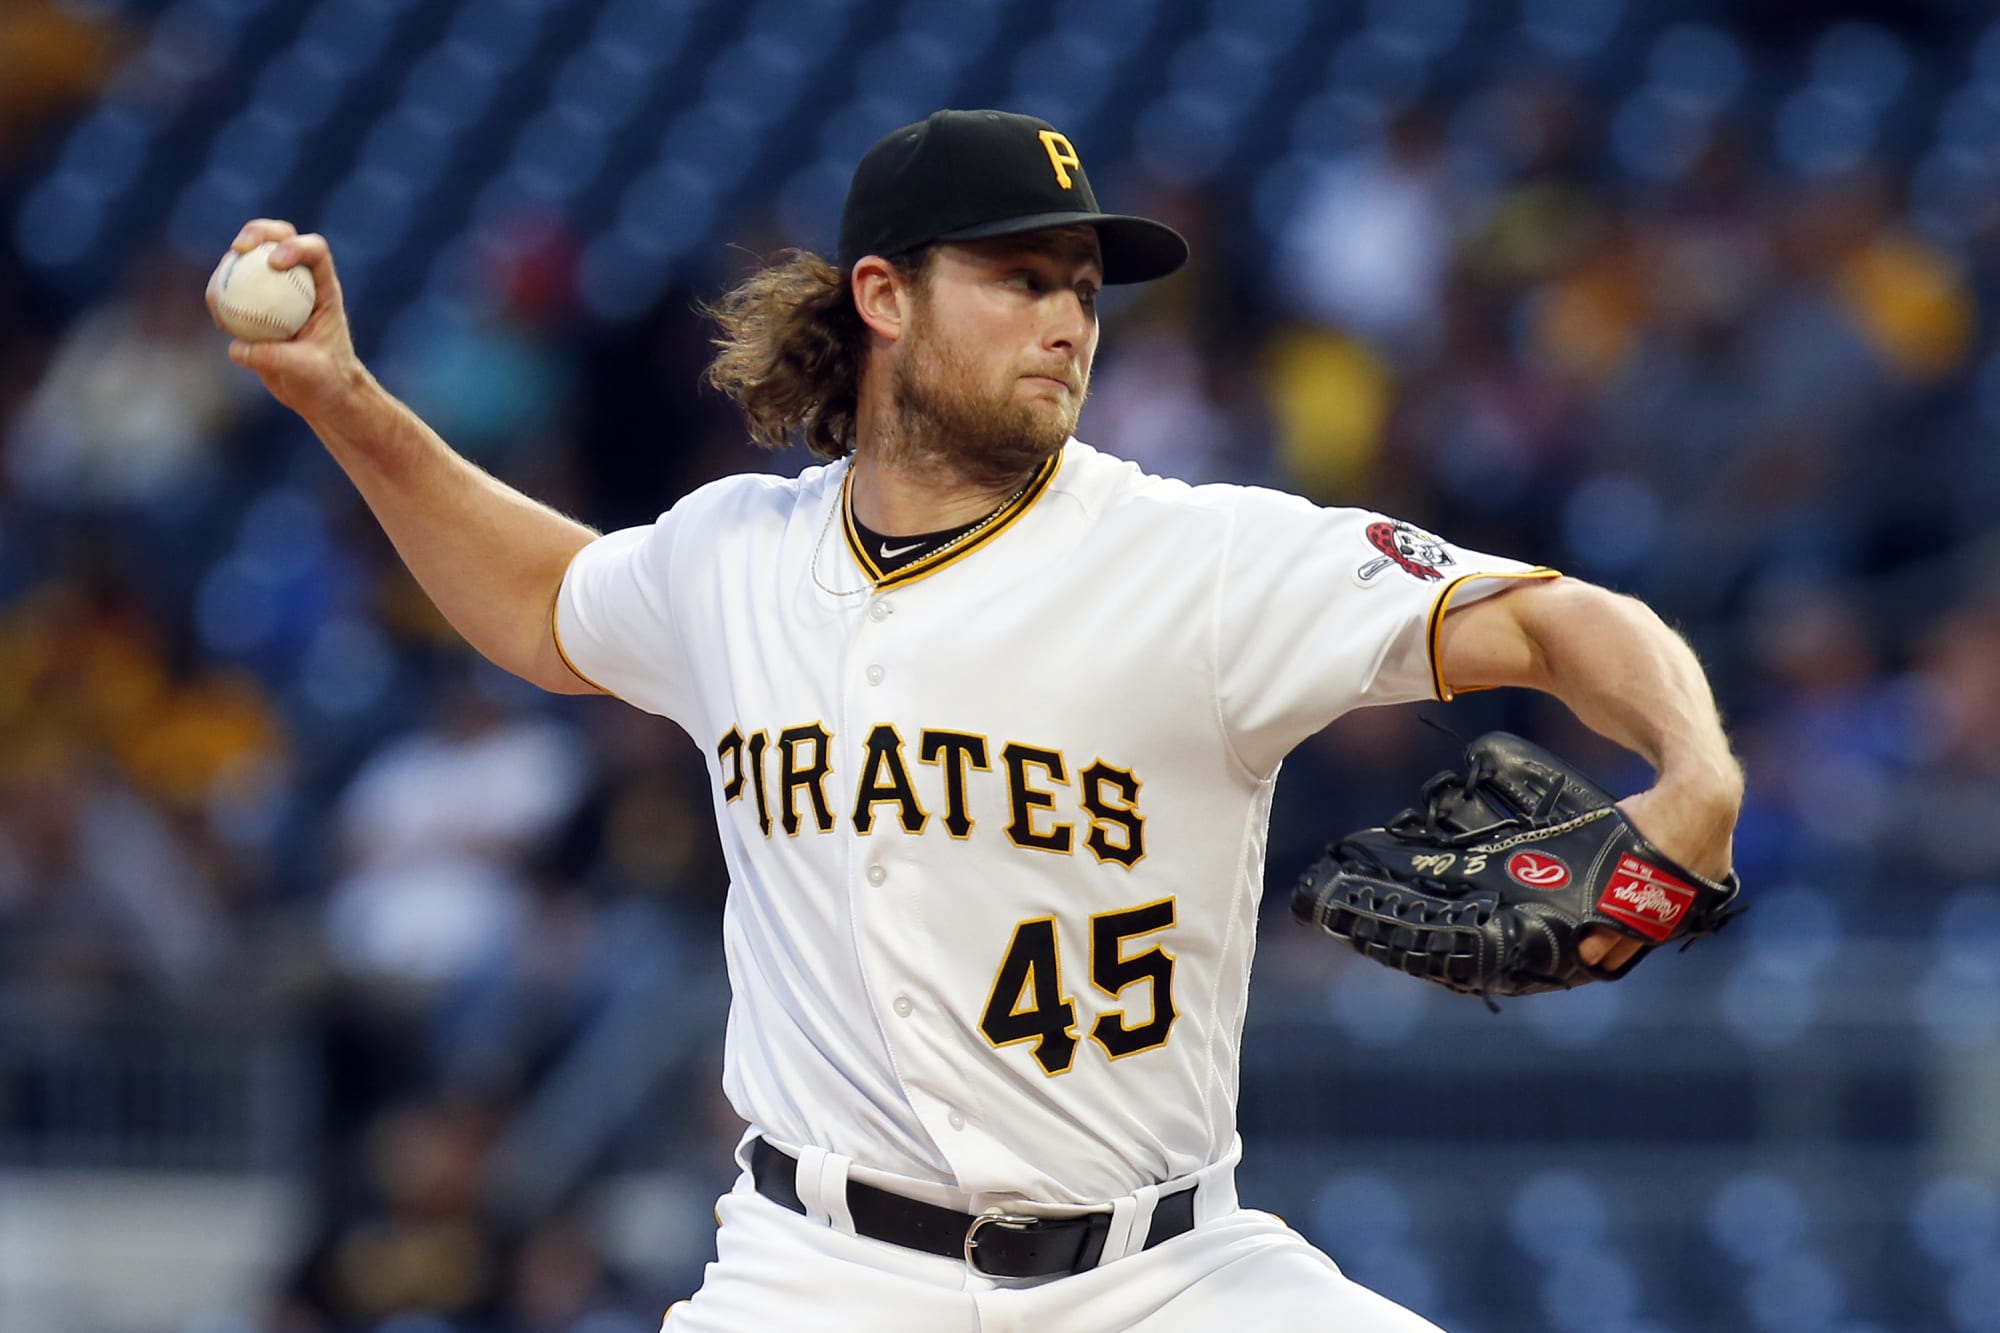 Pittsburgh Pirates Have FourGame Win Streak Snapped by Cubs